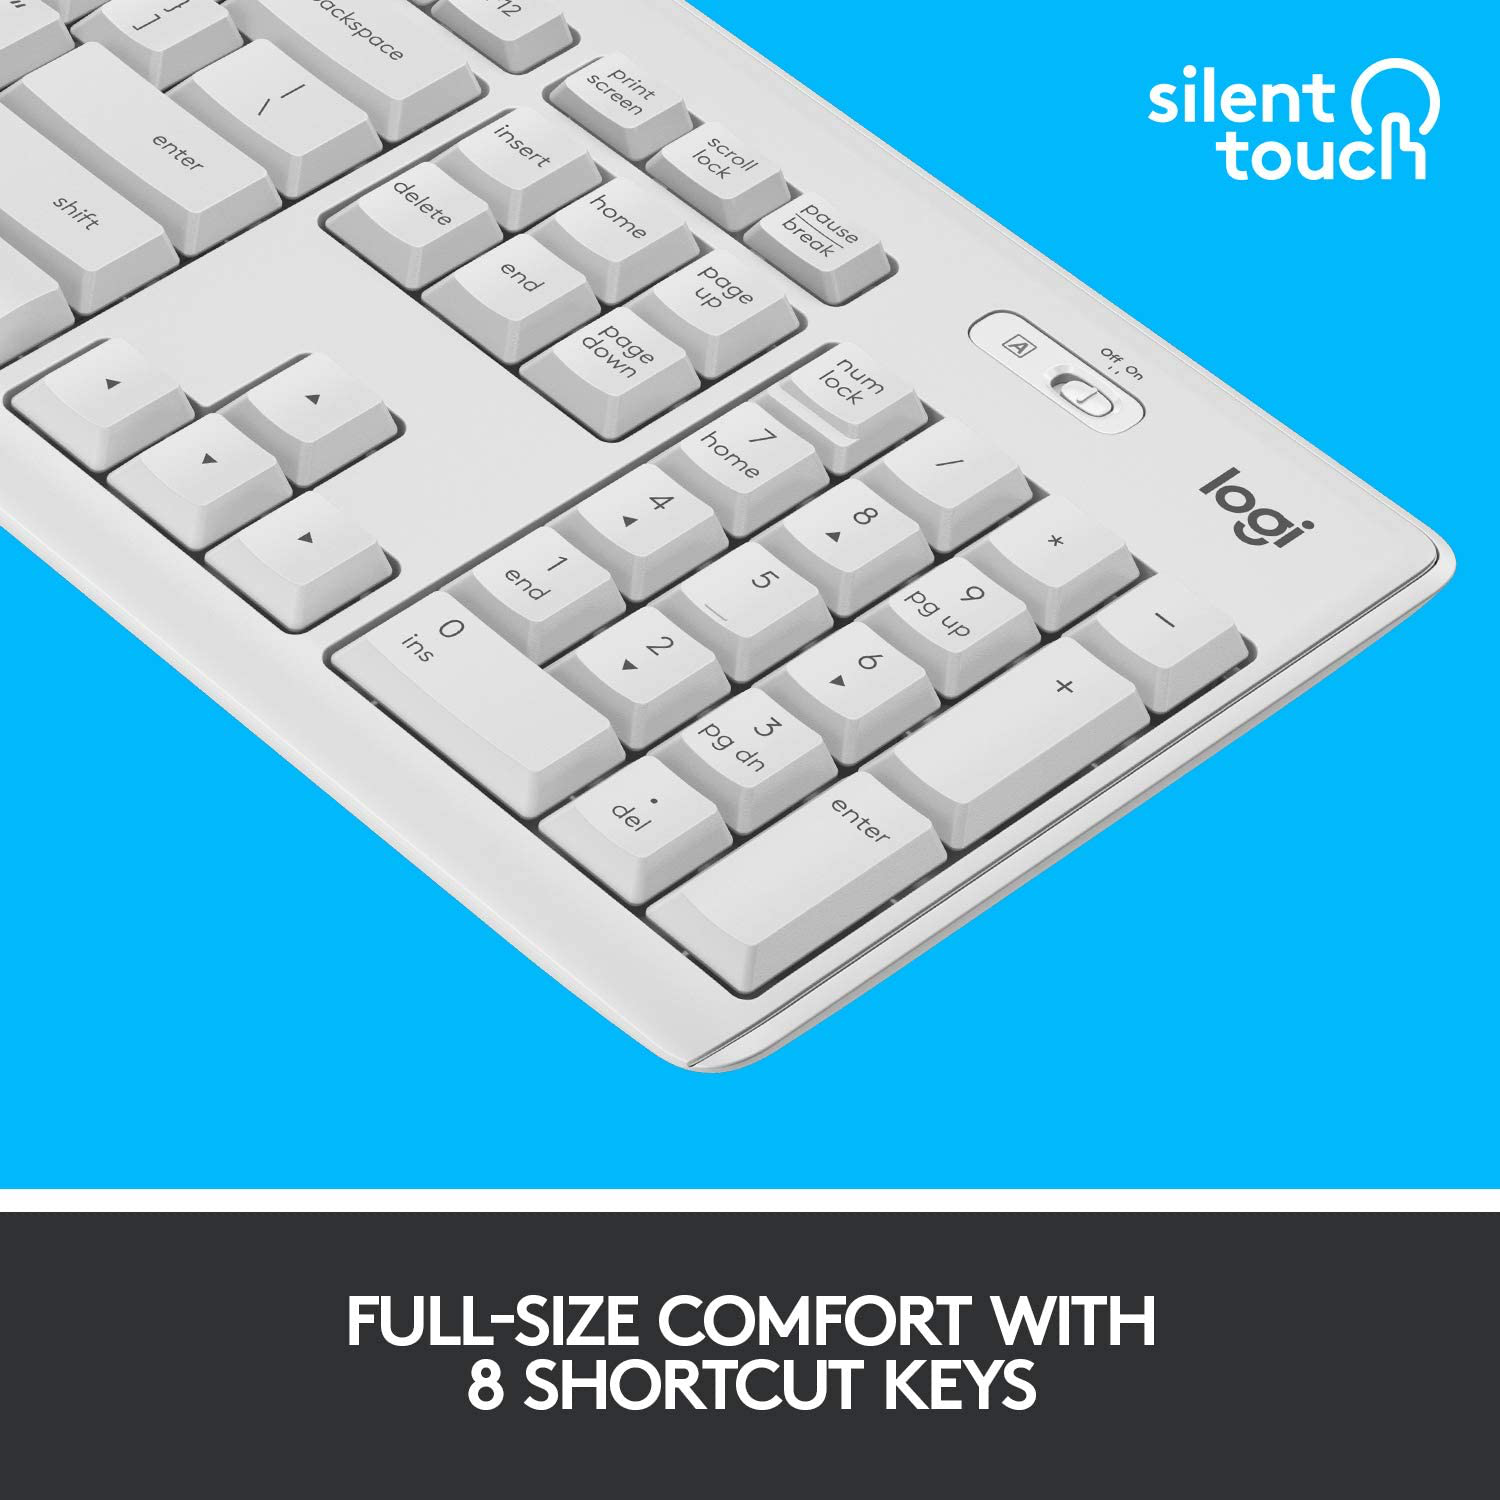 Logitech MK295 Wireless Mouse & Keyboard Combo with Silenttouch Technology, Full Numpad, Advanced Optical Tracking, Lag-Free Wireless, 90% Less Noise - off White